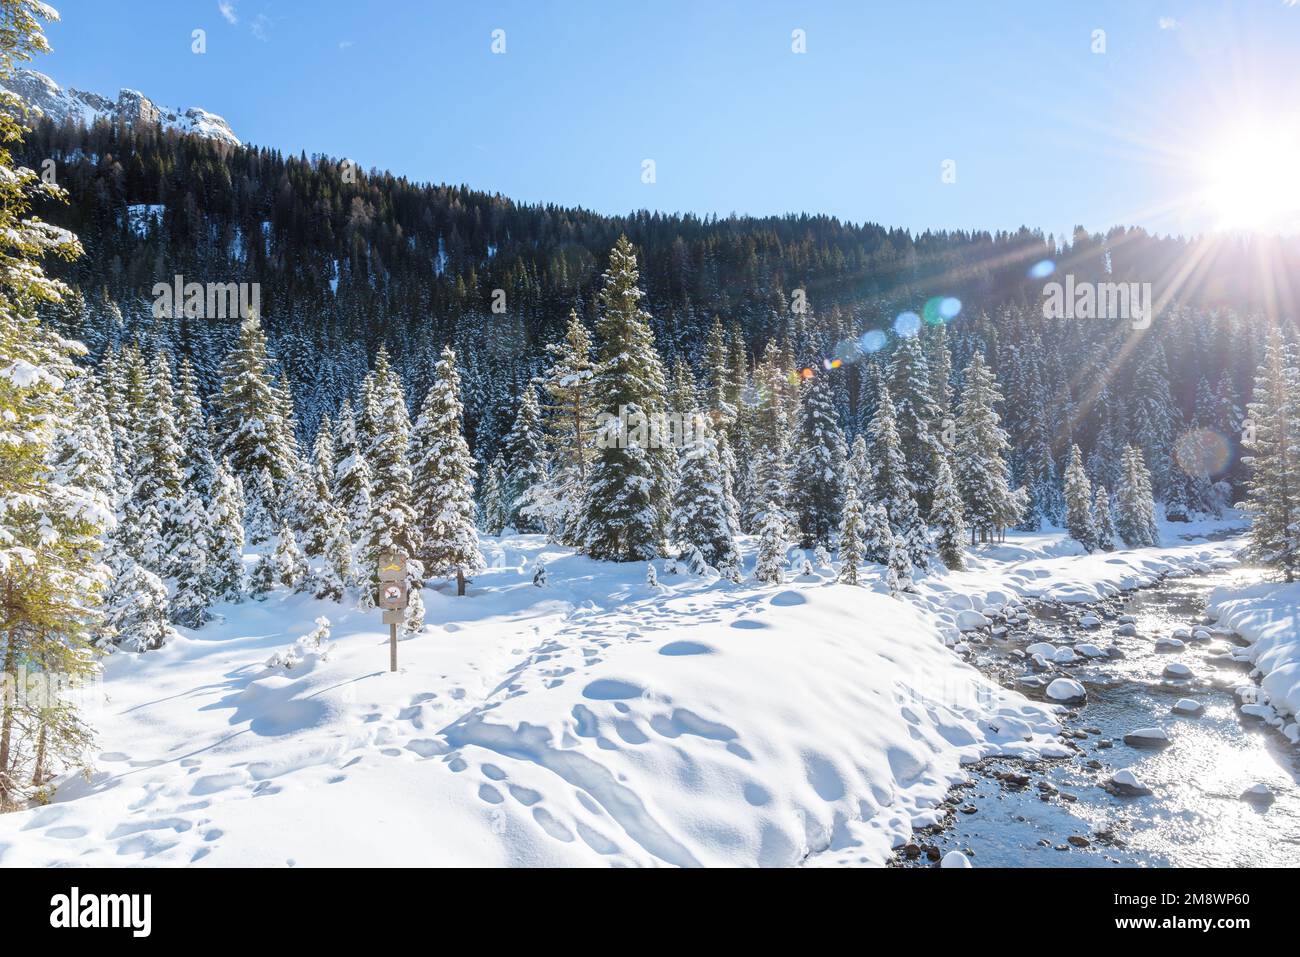 Creek through a snowy mountain landscape in winter. Lens flare. Stock Photo